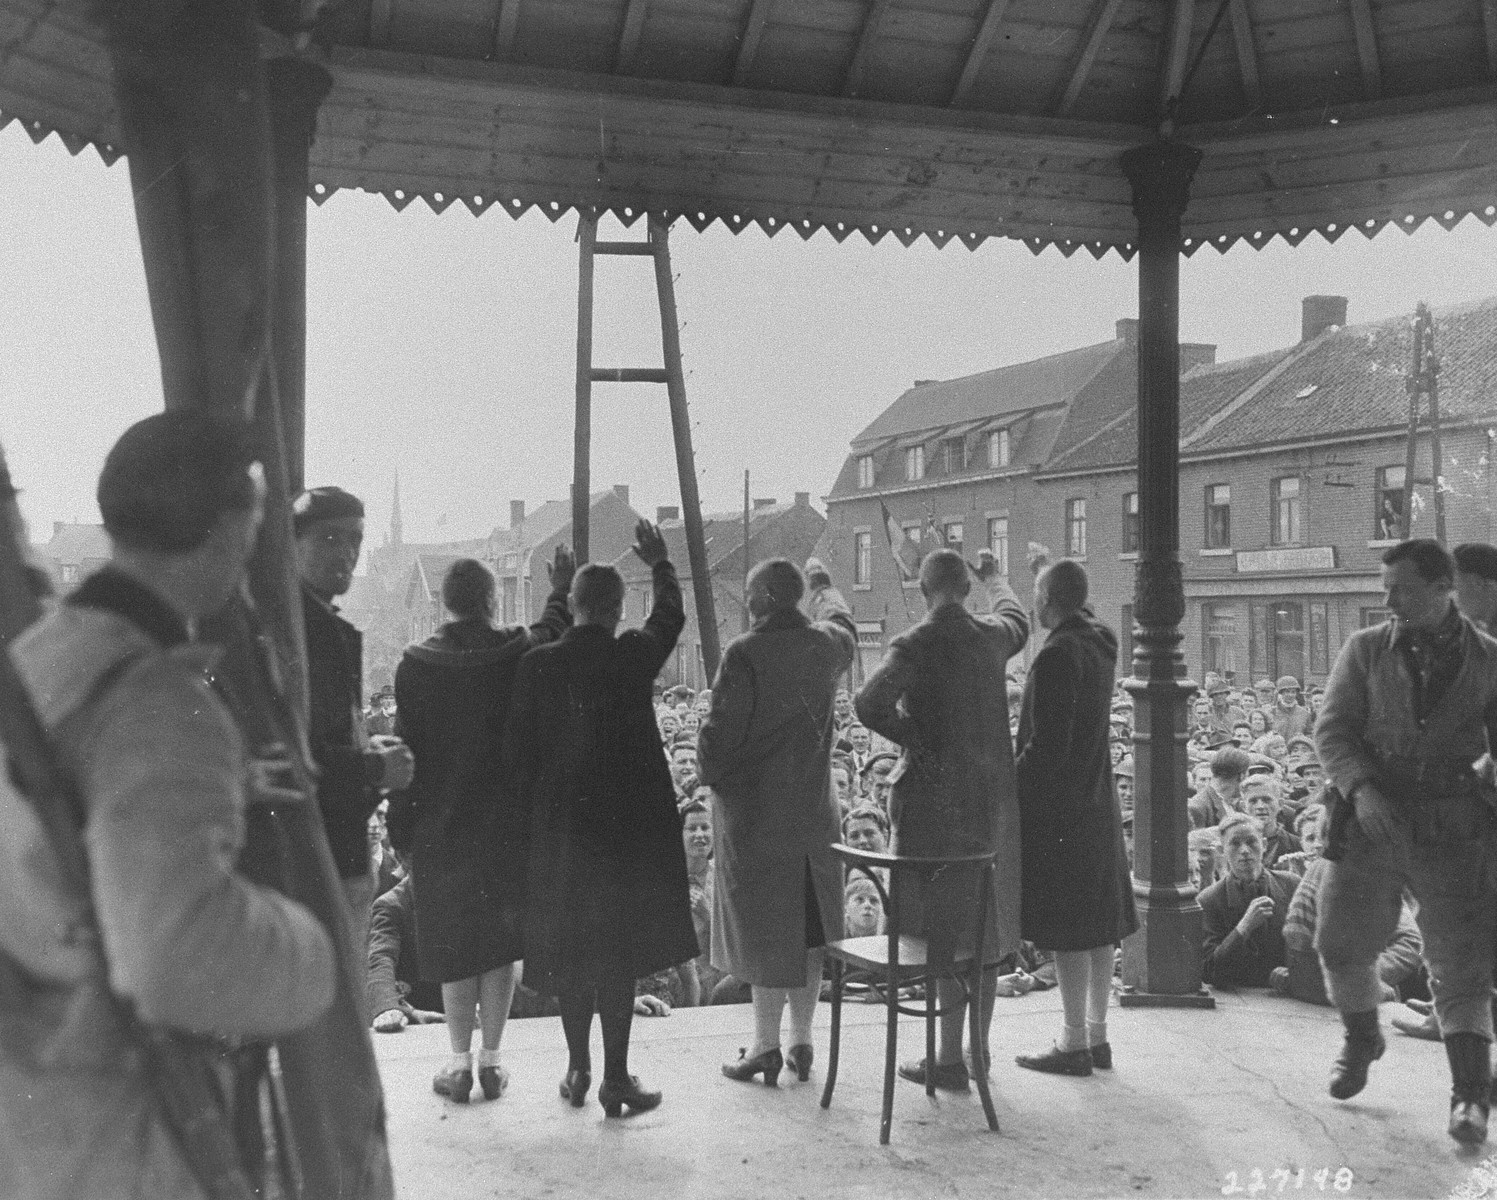 Belgian women who collaborated with the Germans during the occupation are forced to give the Nazi salute before their jeering countrymen.  The women's heads were all shaven as part of their public humiliation.